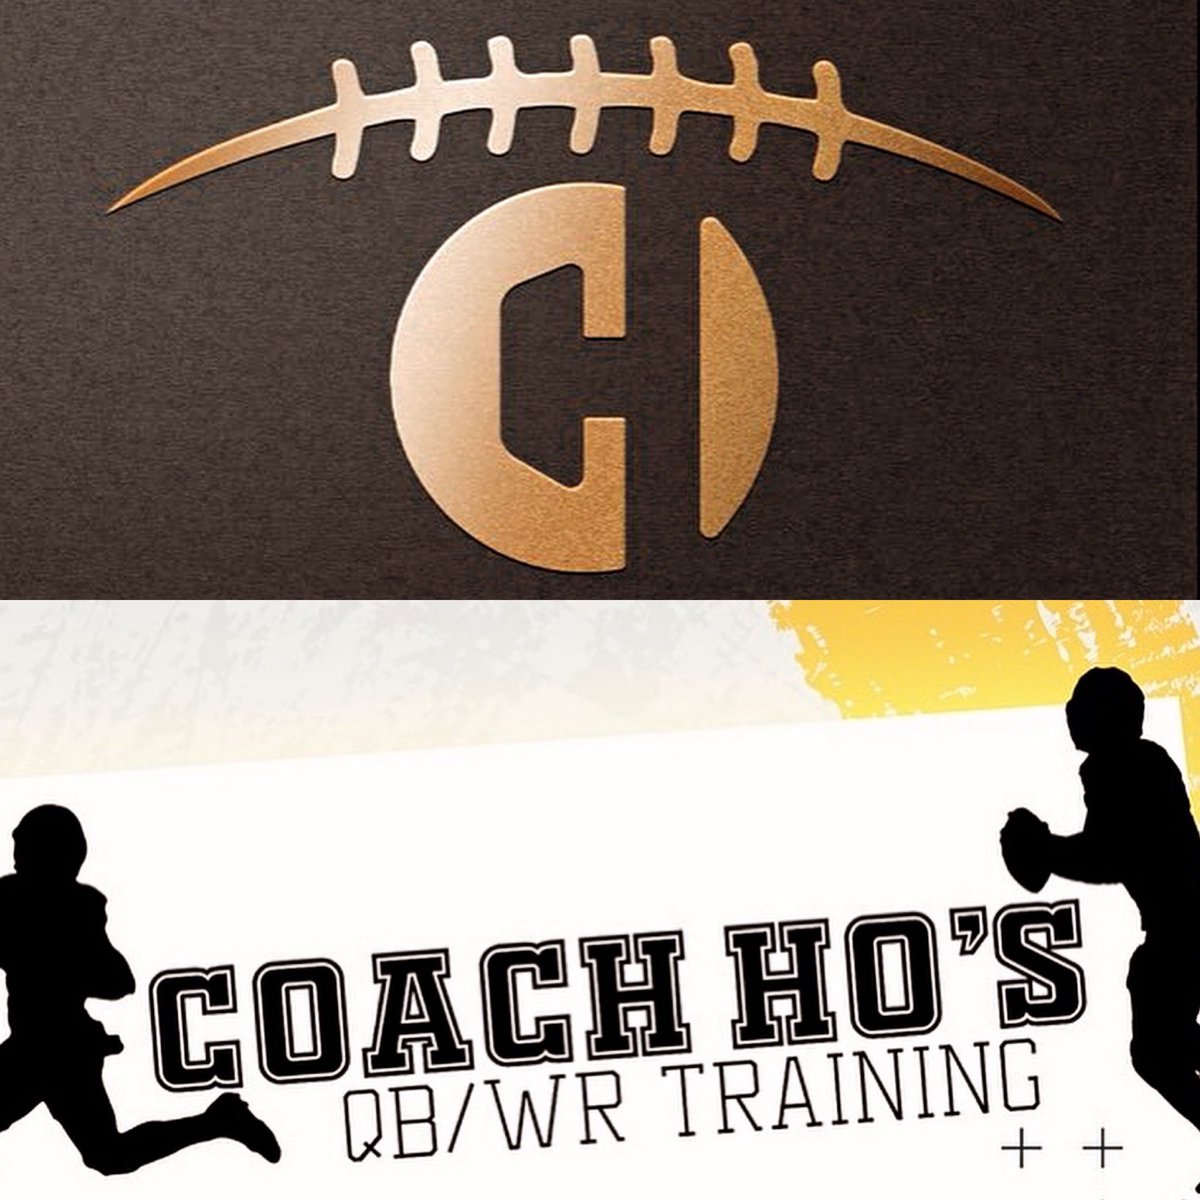 Most coaches aren't as concerned about what you did in the past as they are about what you're capable and willing to do now. What you did got you in the building, but its not always enough to keep you there now. We got this! #ATTITUDE😤 #HavingTheMostFun😉 CoachHo.com/camps